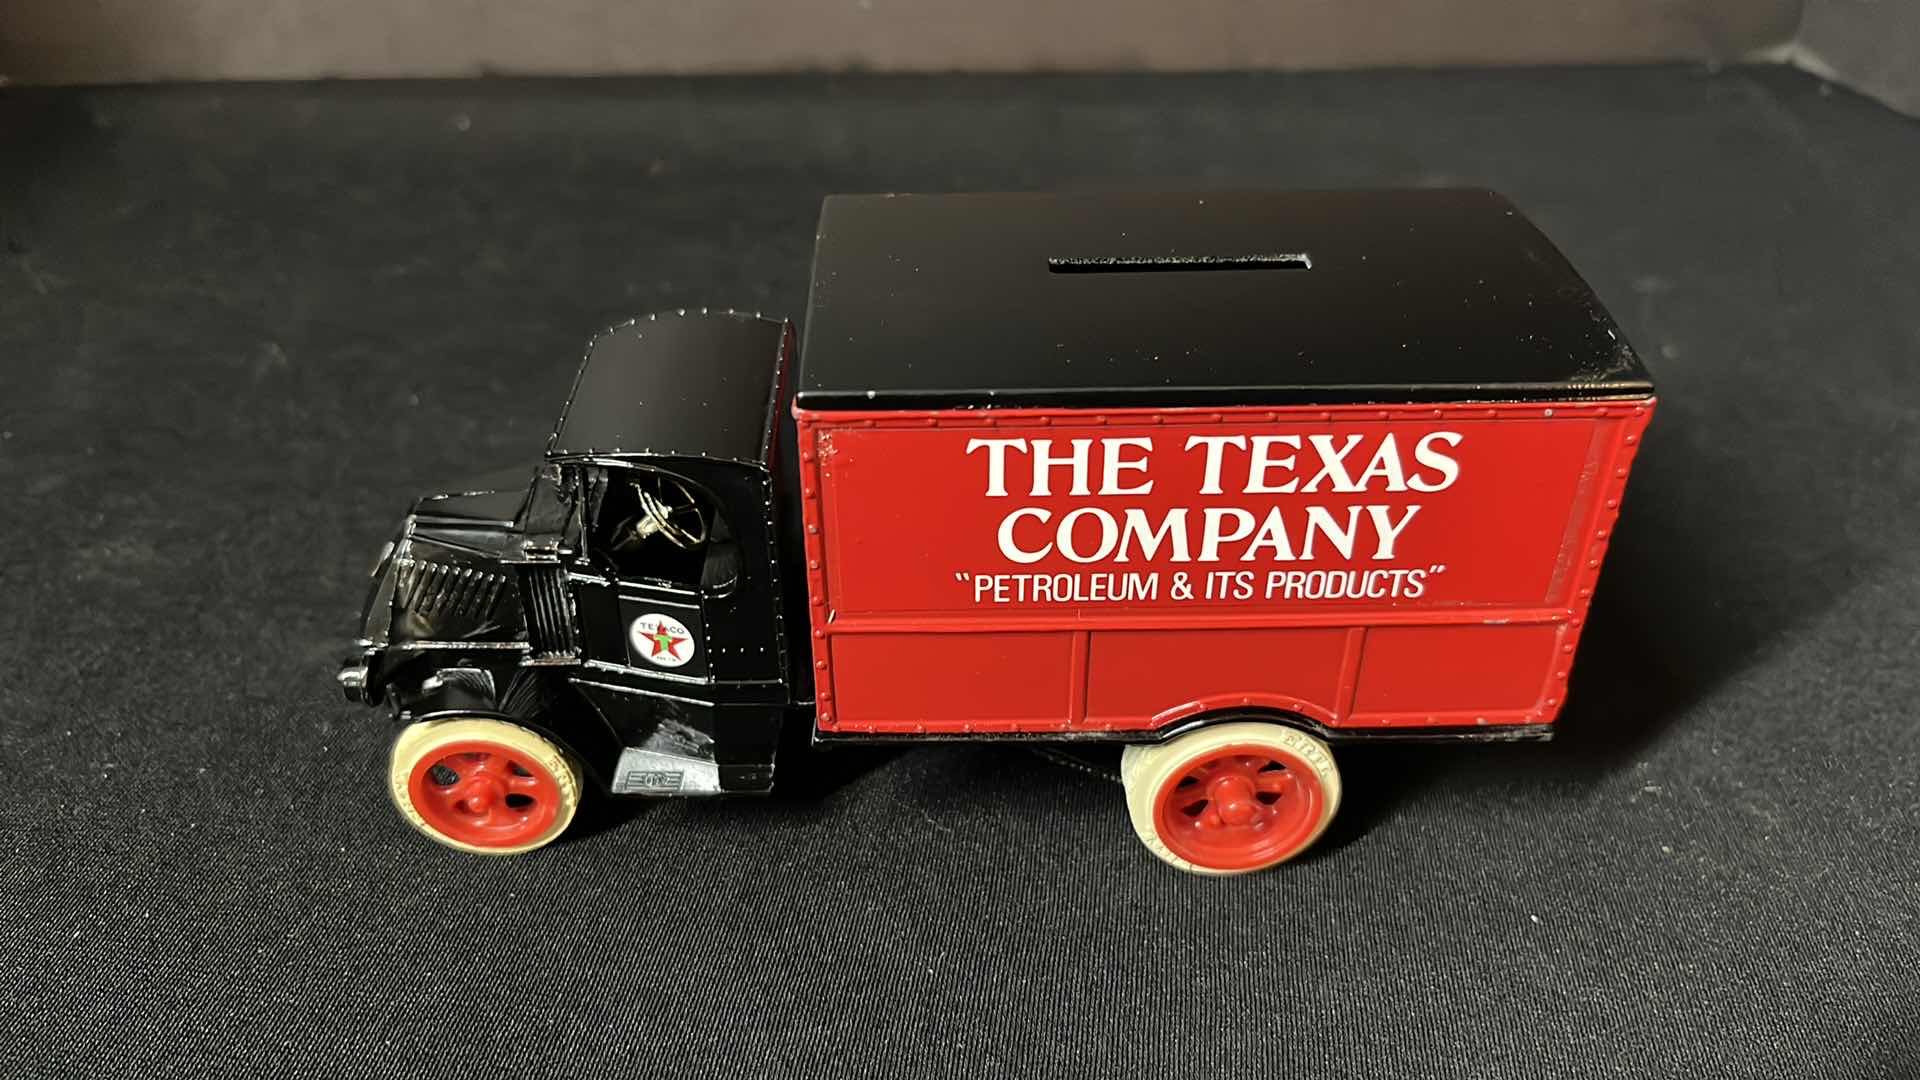 Photo 1 of ERTL DIE-CAST METAL LIMITED EDITION TEXACO 1925 MACK BULLDOG LUBRICANT TRUCK LOCKING COIN BANK W KEY, COLLECTORS SERIES #6, 1989 (STOCK NO 9040VO)